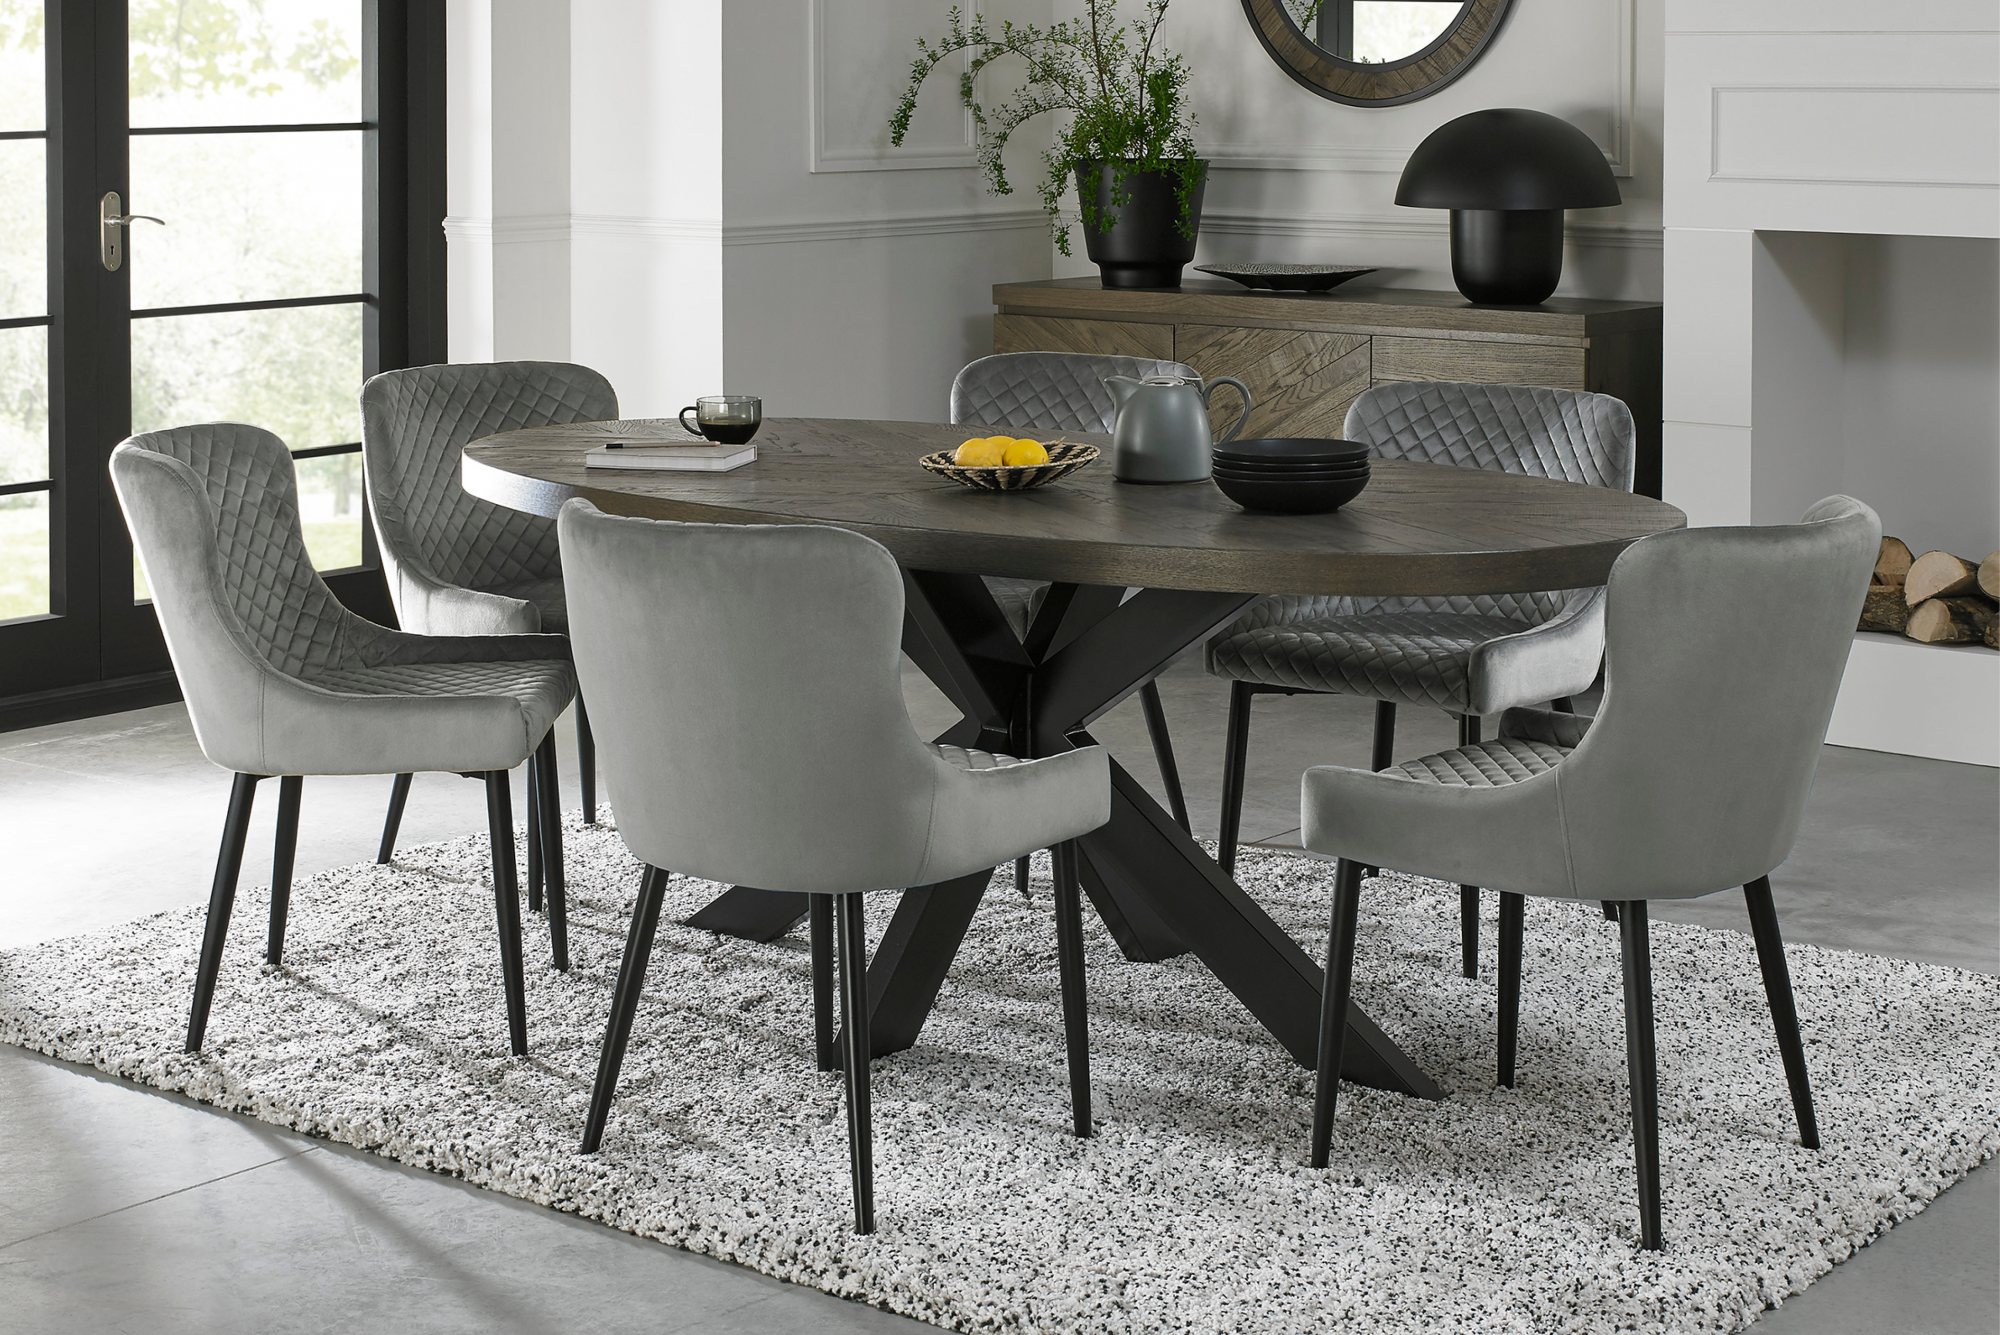 Home Origins Bosco fumed oak 6 seater dining table with 6 Cezanne chairs- grey velvet fabric